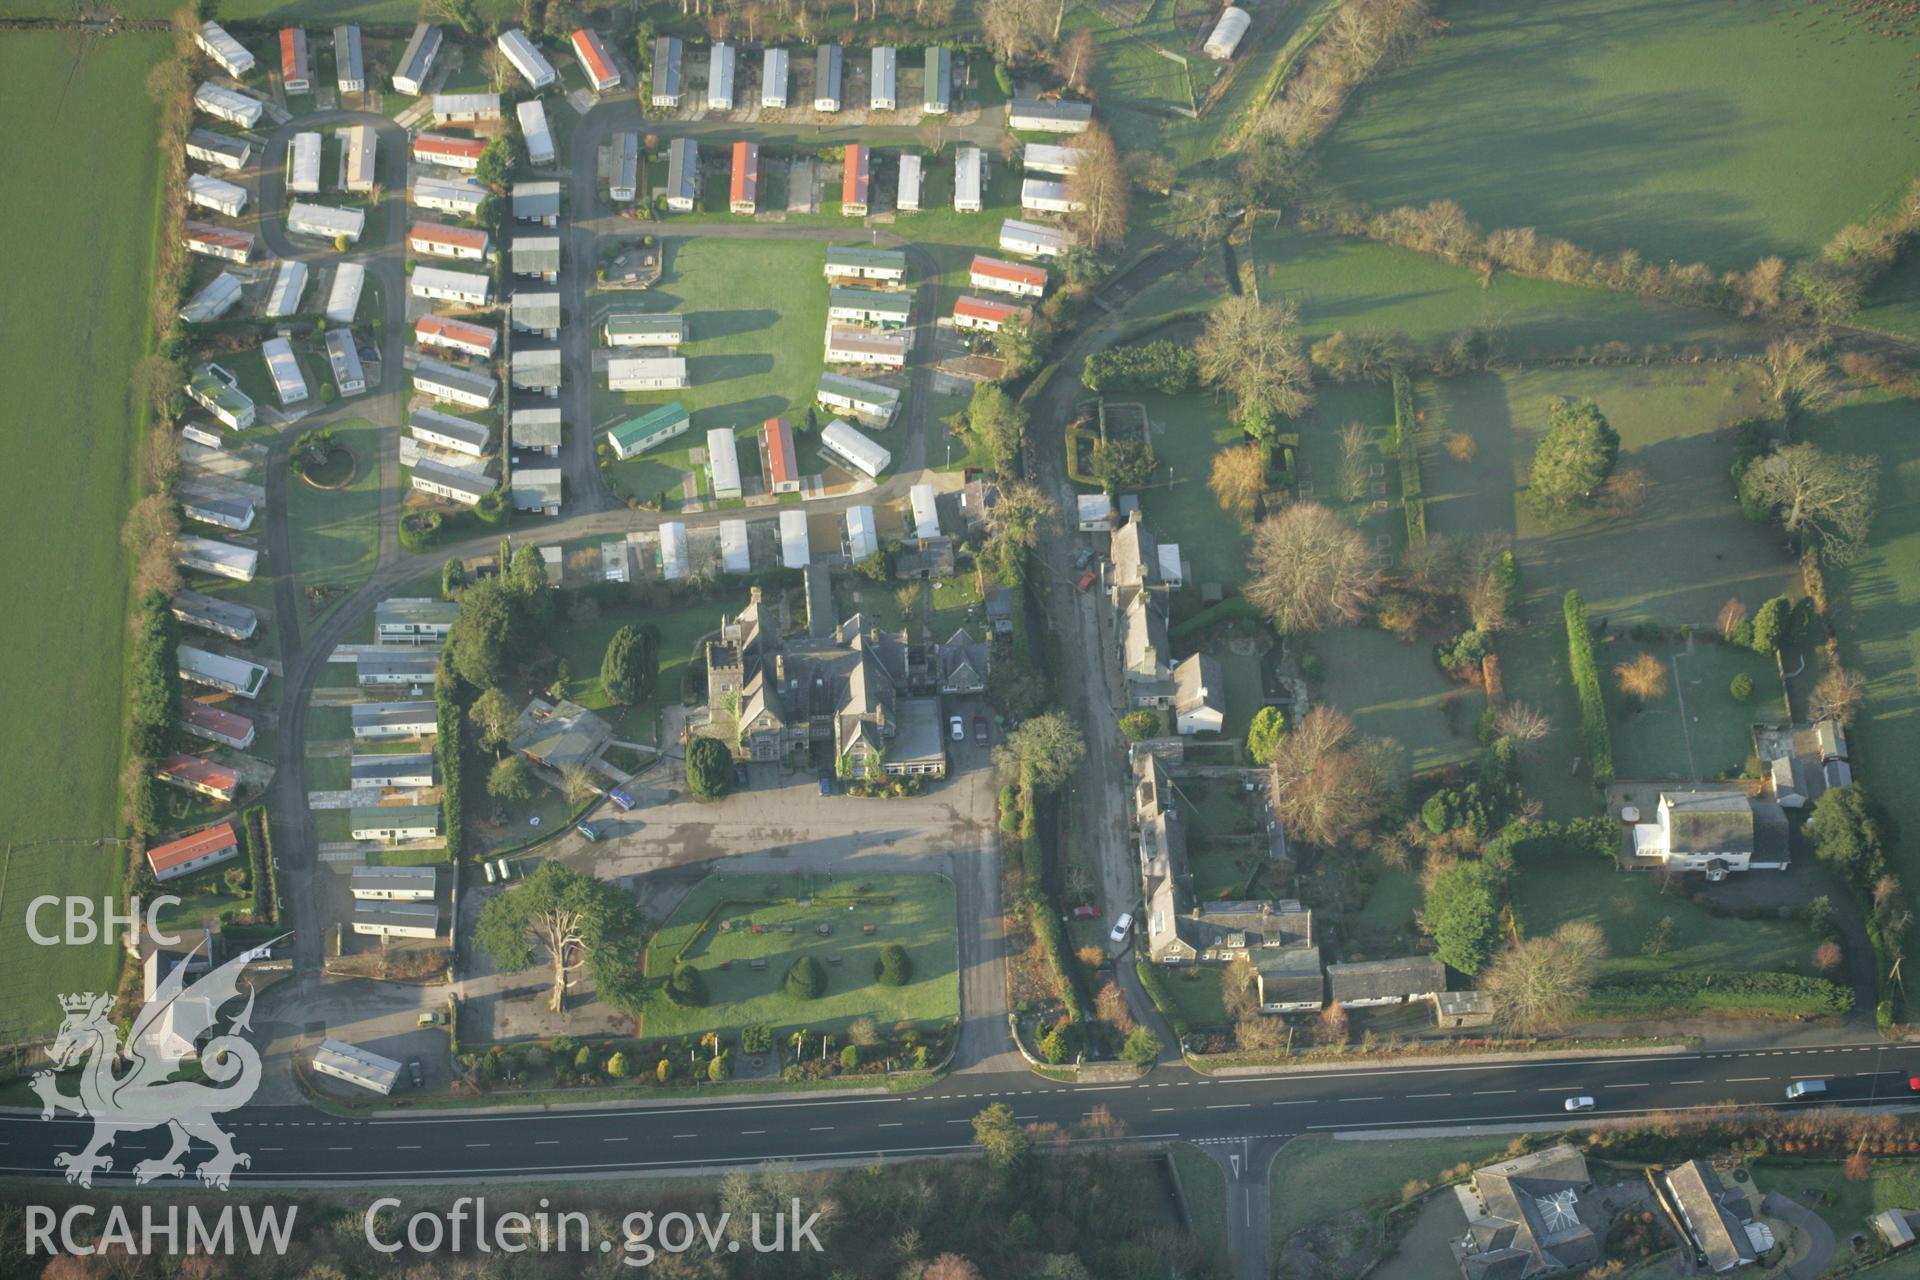 RCAHMW colour oblique aerial photograph of Maenan Abbey, Aberconwy. Taken on 25 January 2007 by Toby Driver